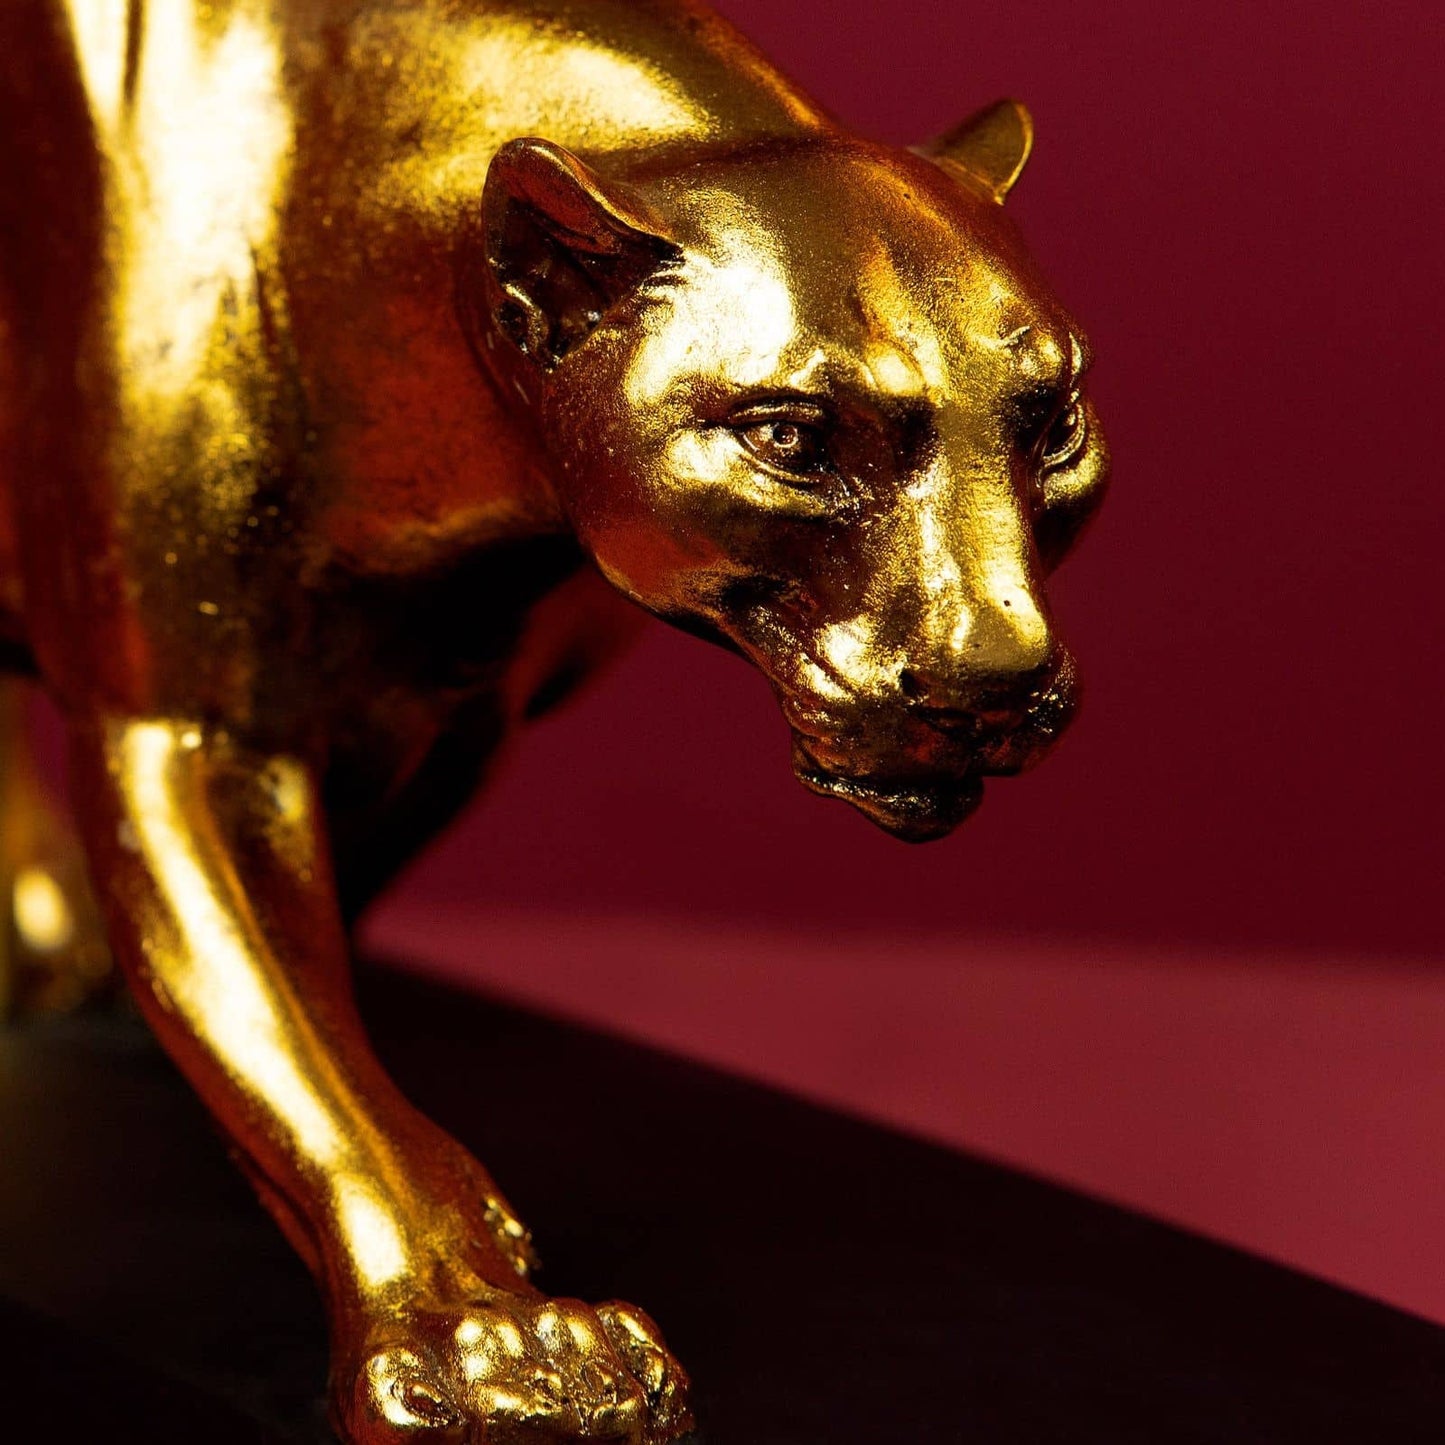 Baghiro Panther Design Table Lamp in Black and Gold - |VESIMI Design| Luxury Bathrooms and Home Decor